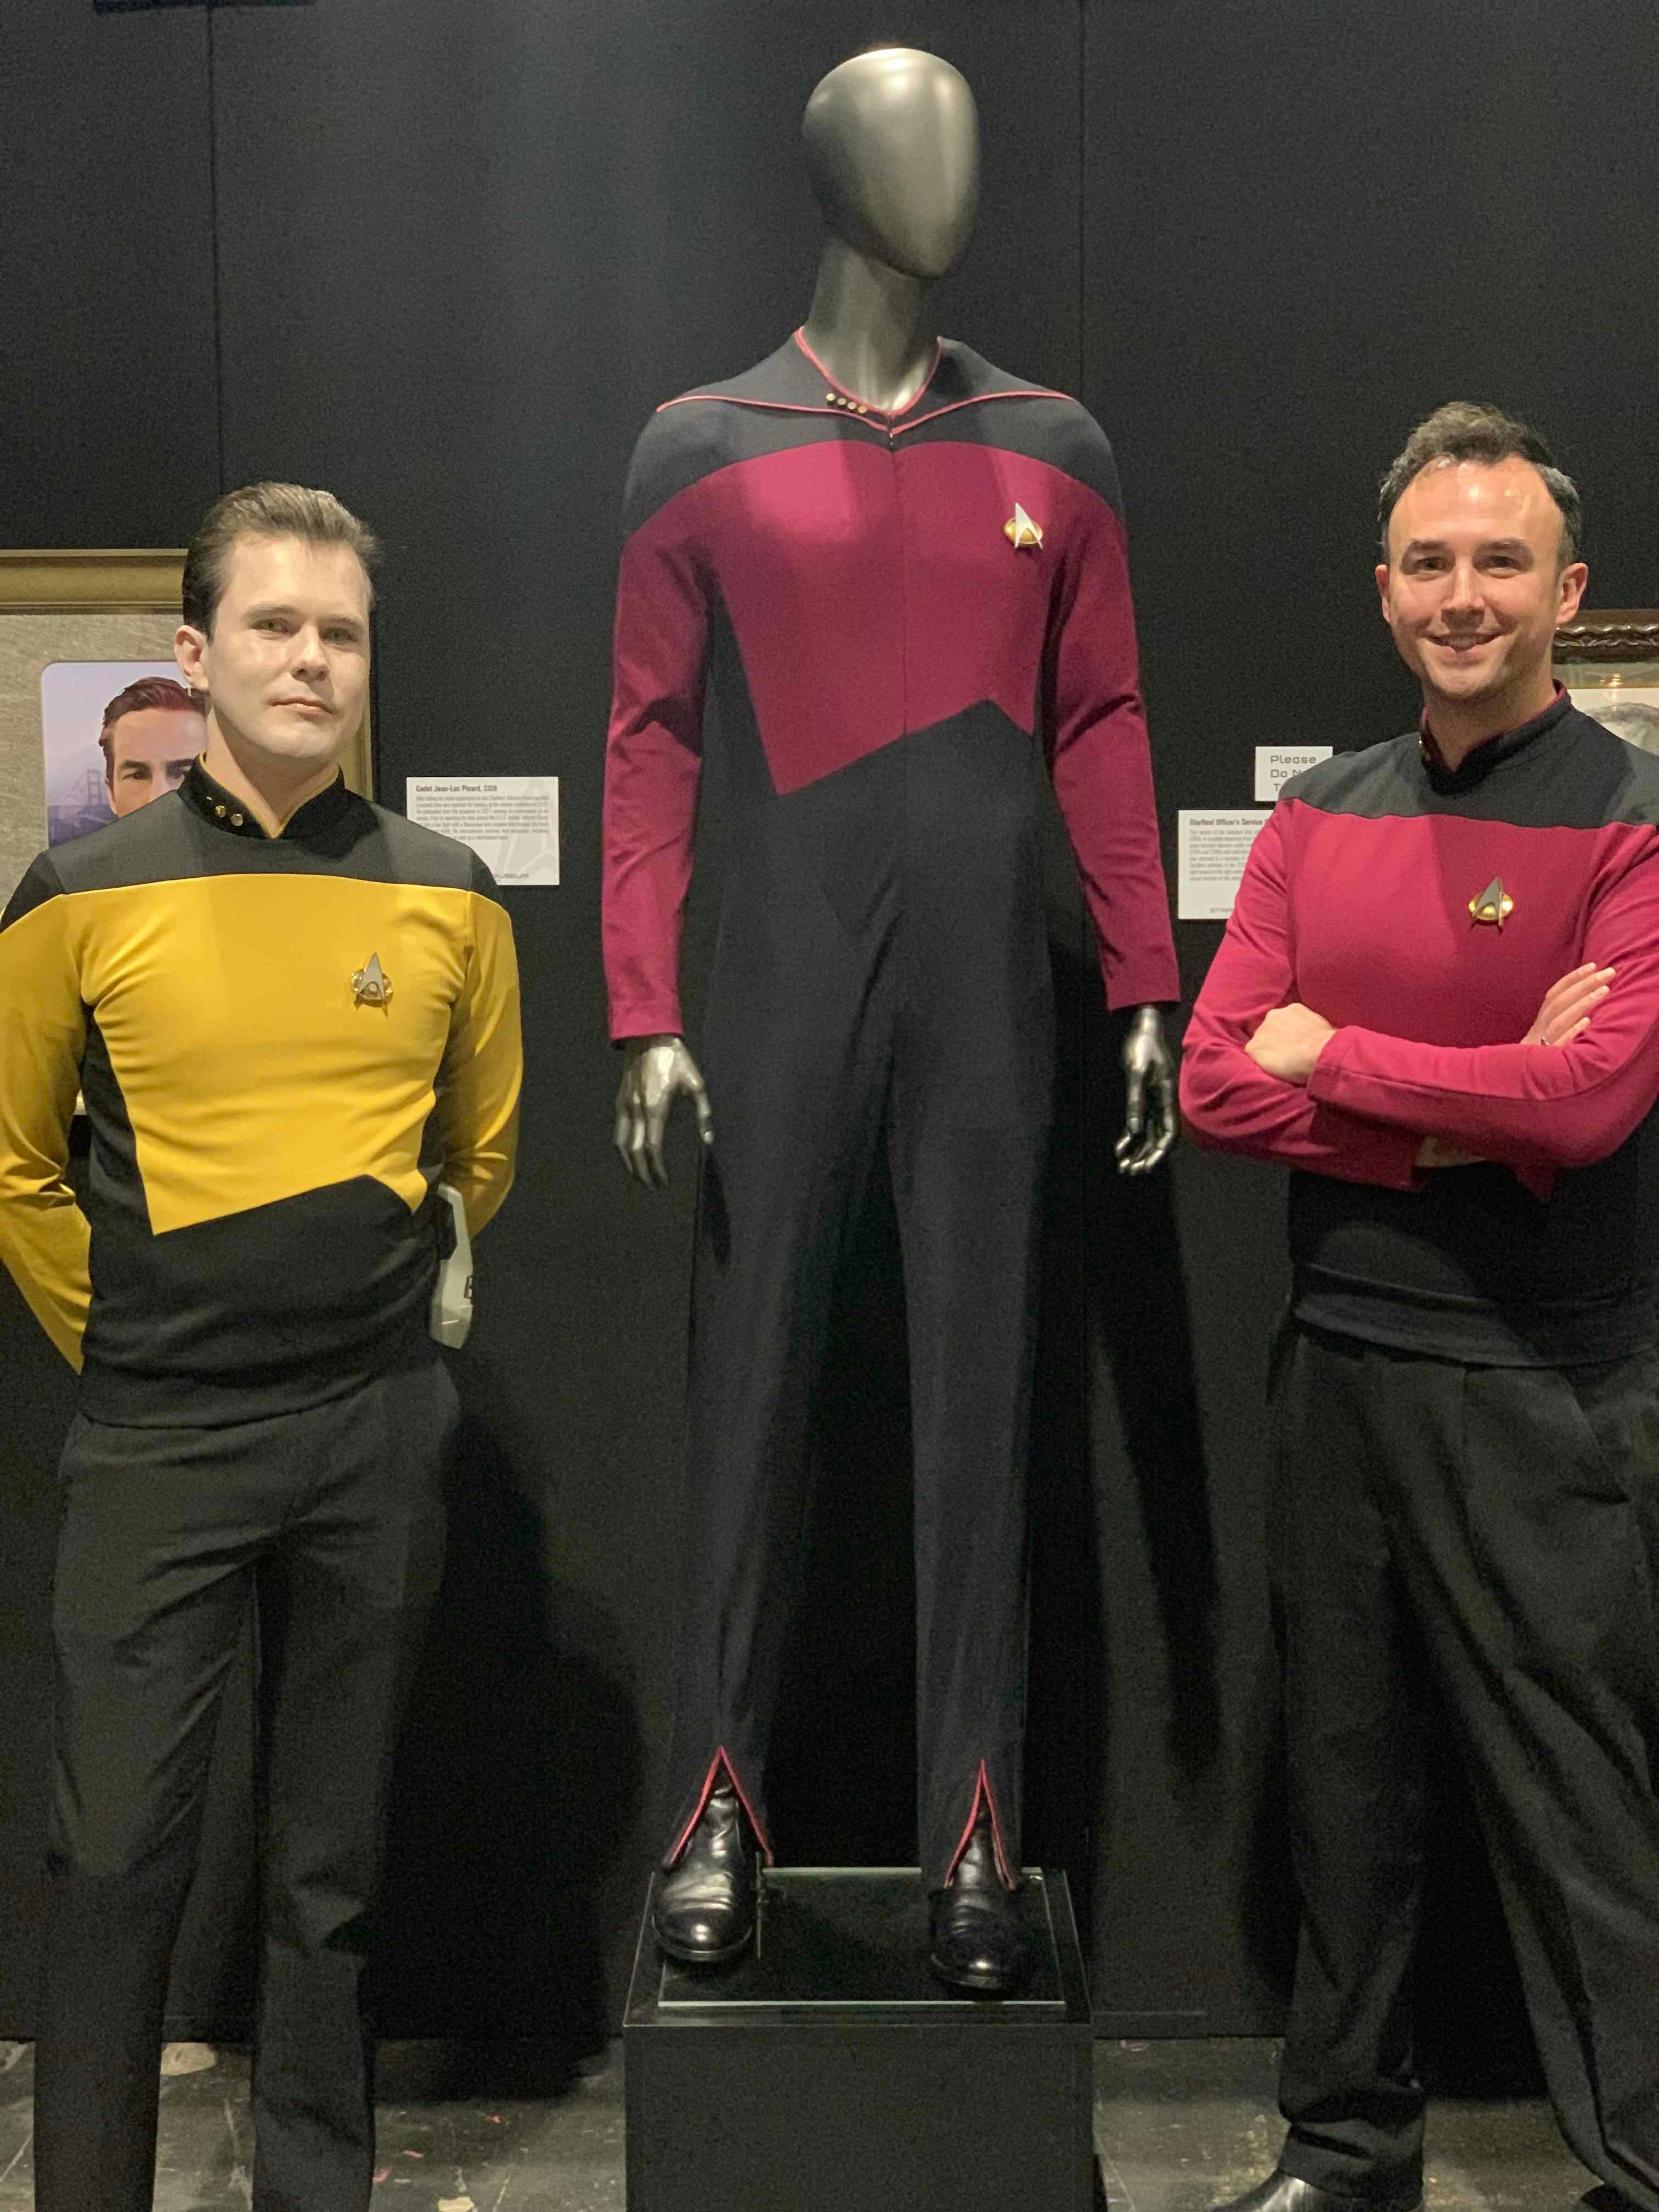 Star Trek: The Next Generation, Data and Picard Cosplay